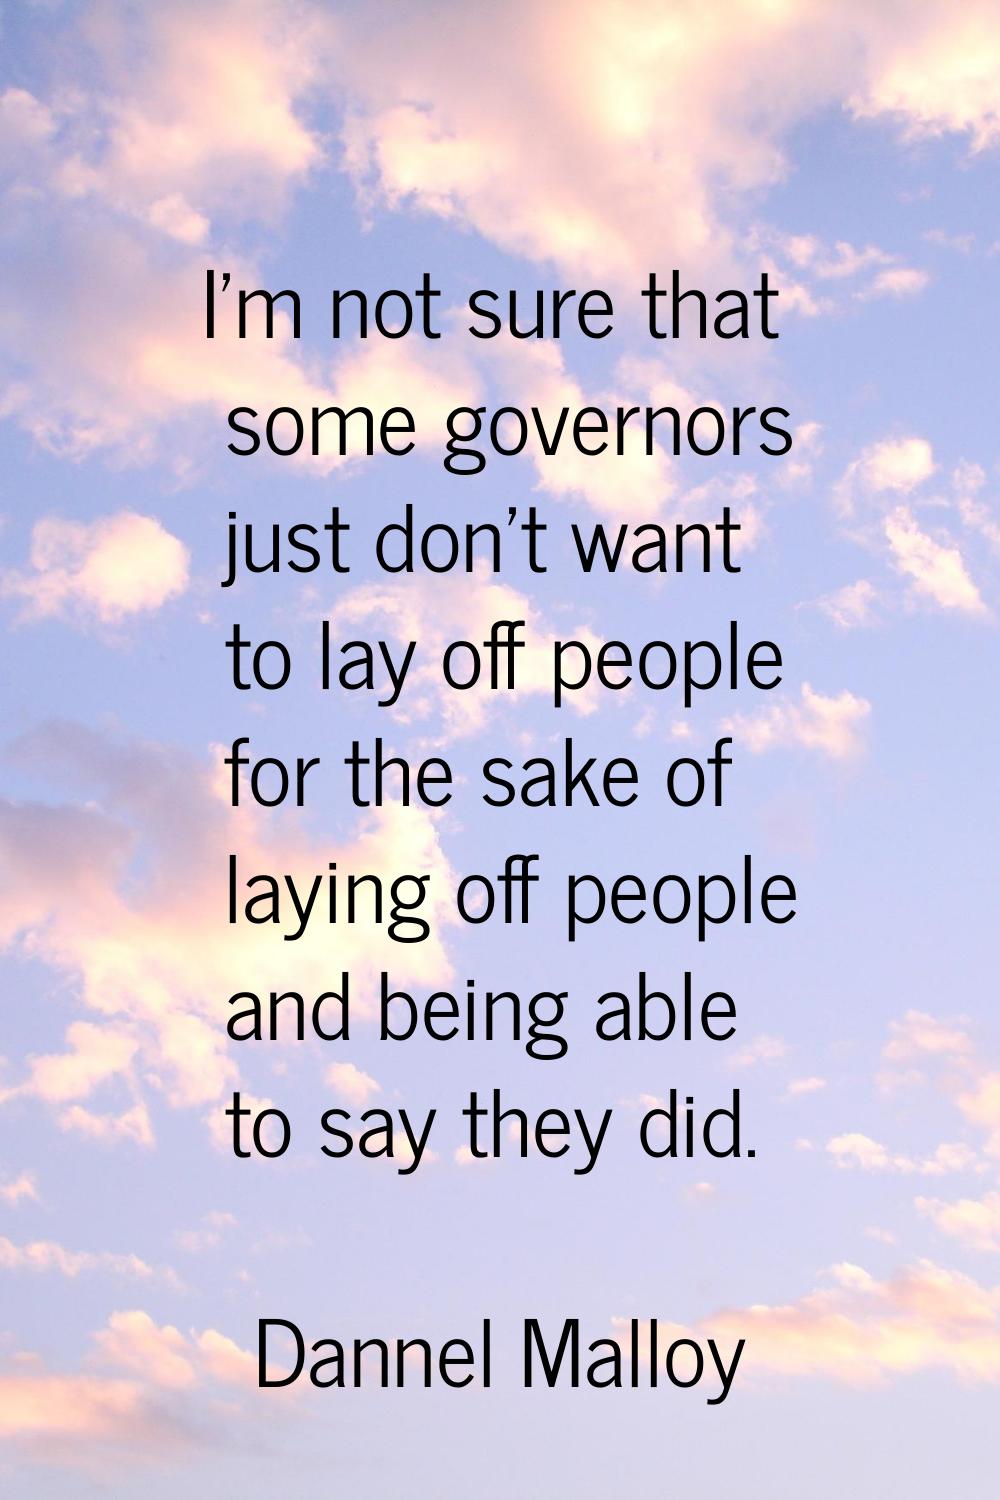 I'm not sure that some governors just don't want to lay off people for the sake of laying off peopl